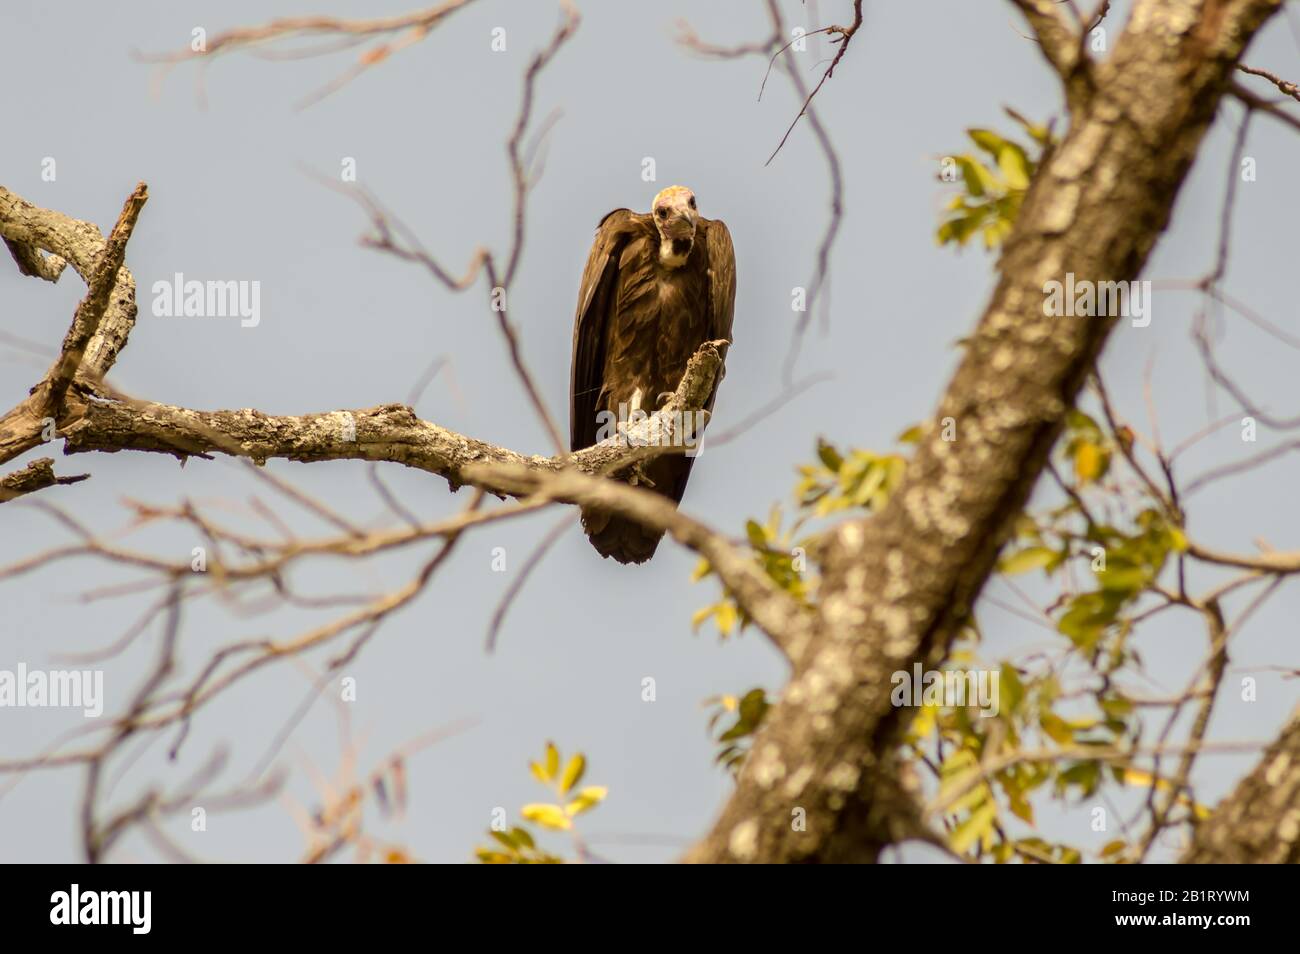 A vulture resting on the branch with a background of multiple tree branches in The Gambia Stock Photo